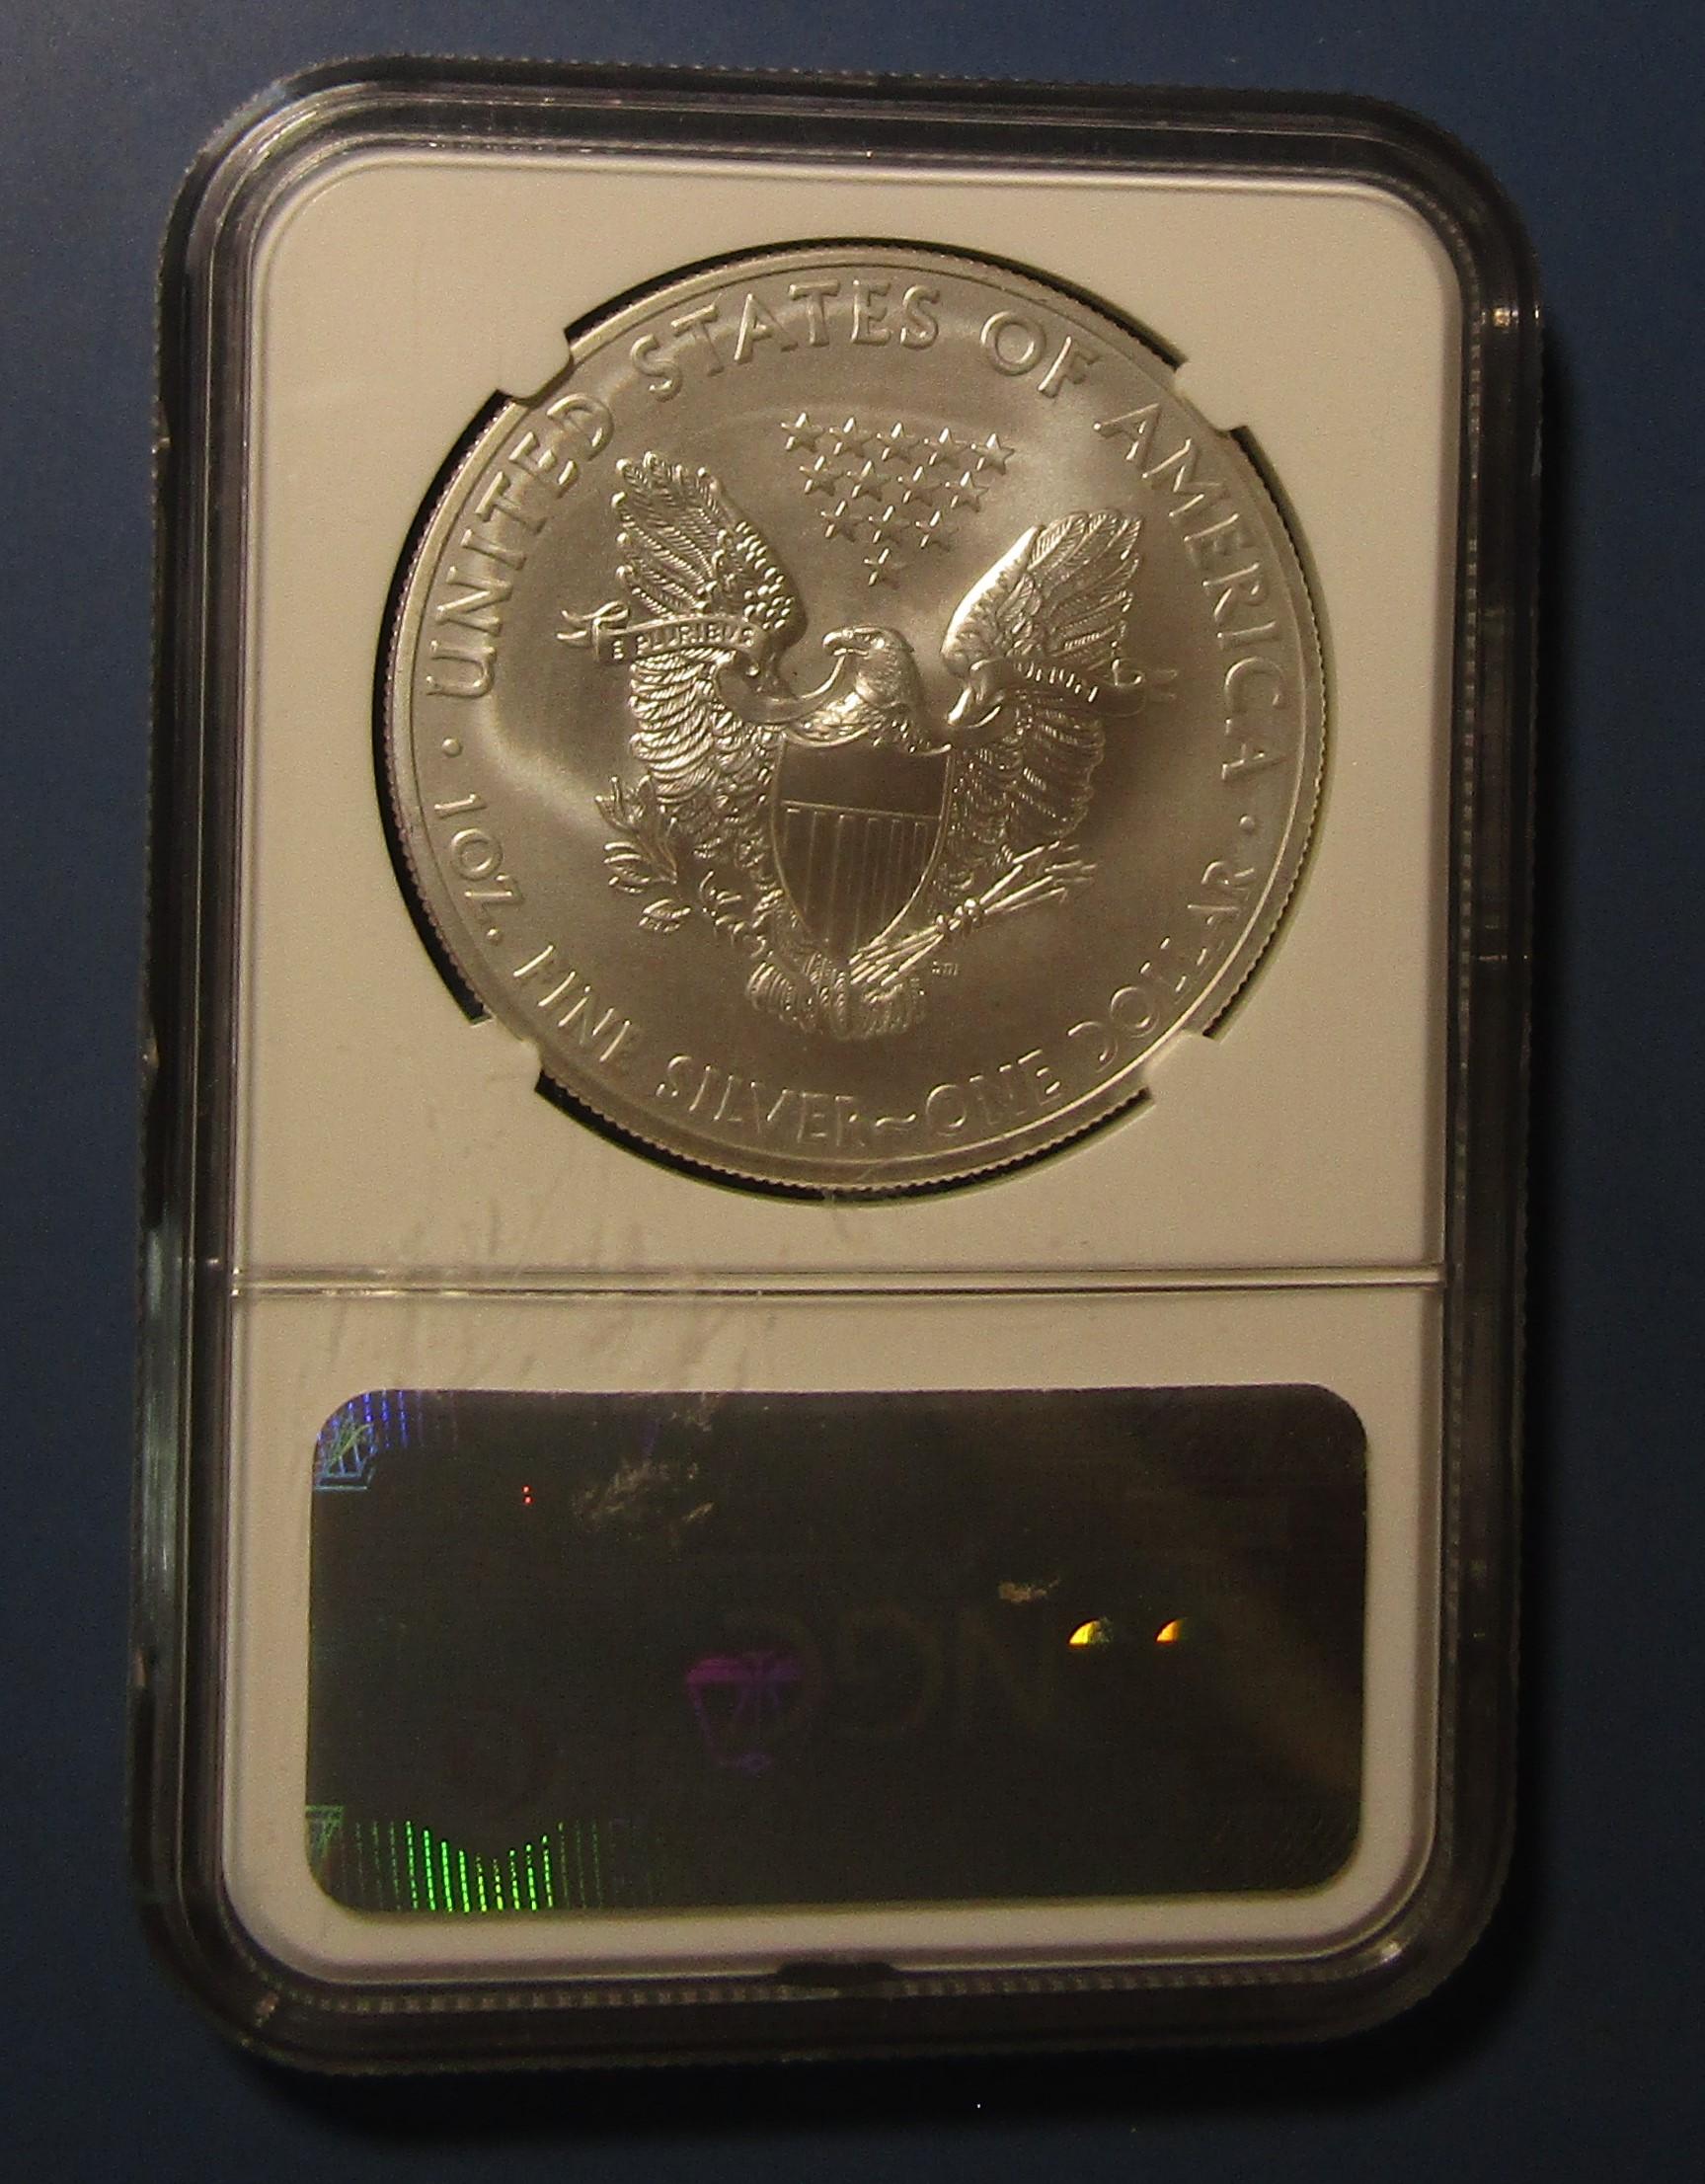 2012-S AMERICAN SILVER EAGLE NGC MS-70